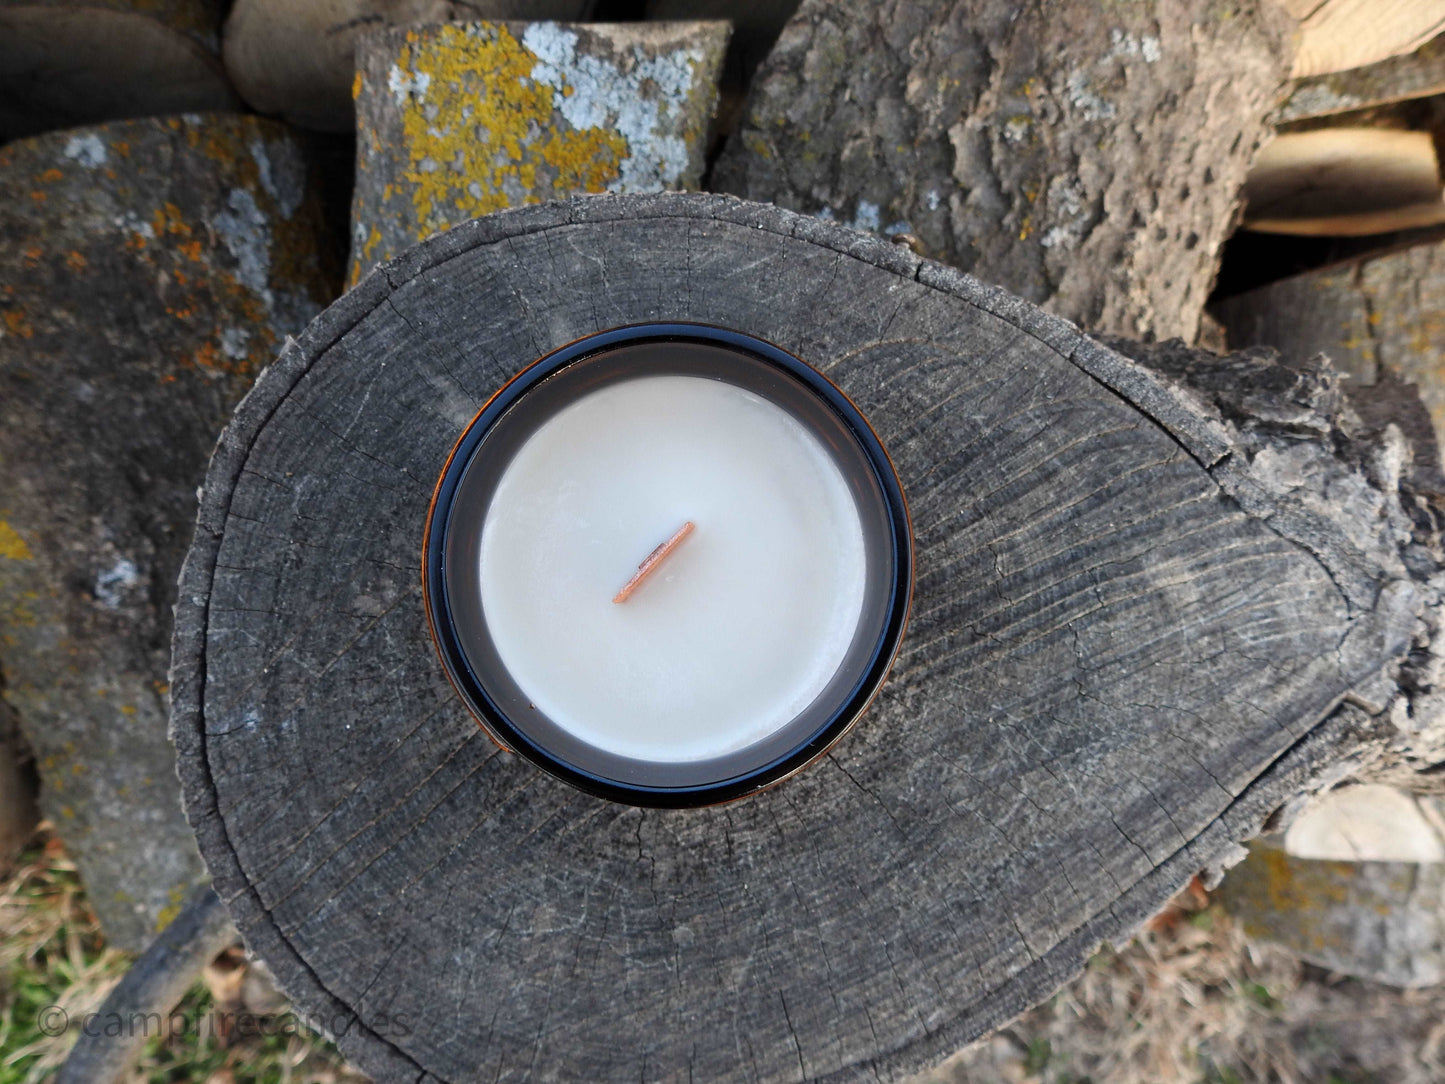 Bear Scat | Soy Candle with Wooden Wick | Campfire Candles